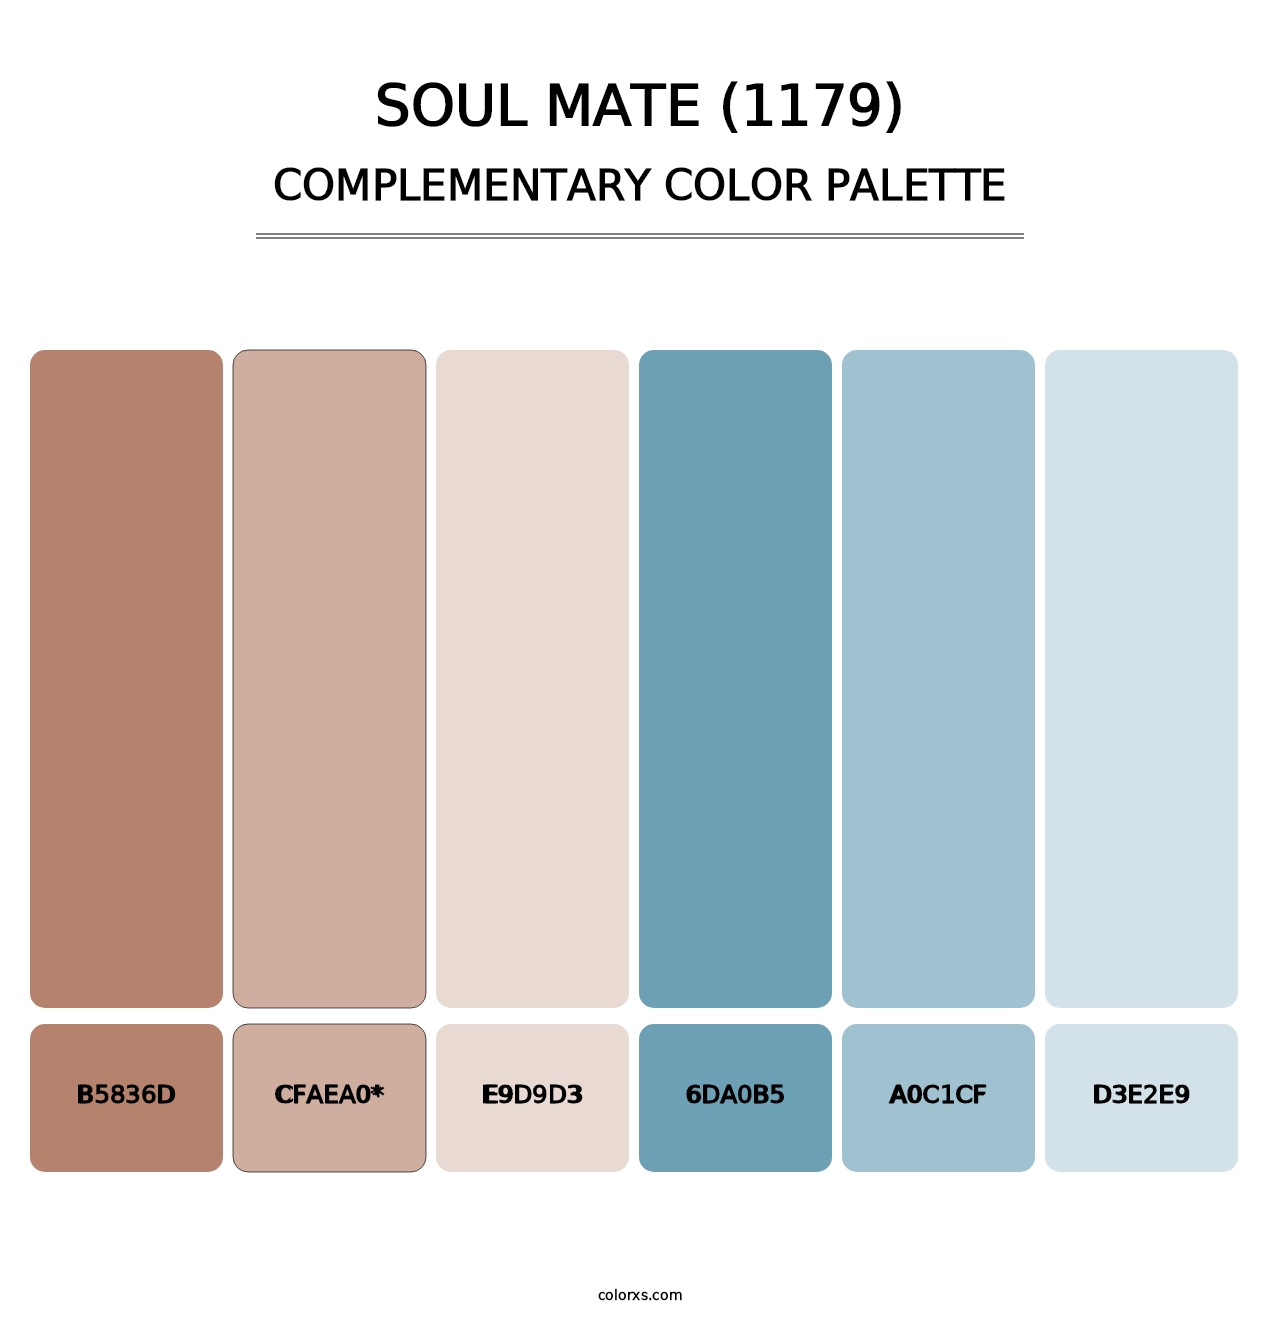 Soul Mate (1179) - Complementary Color Palette